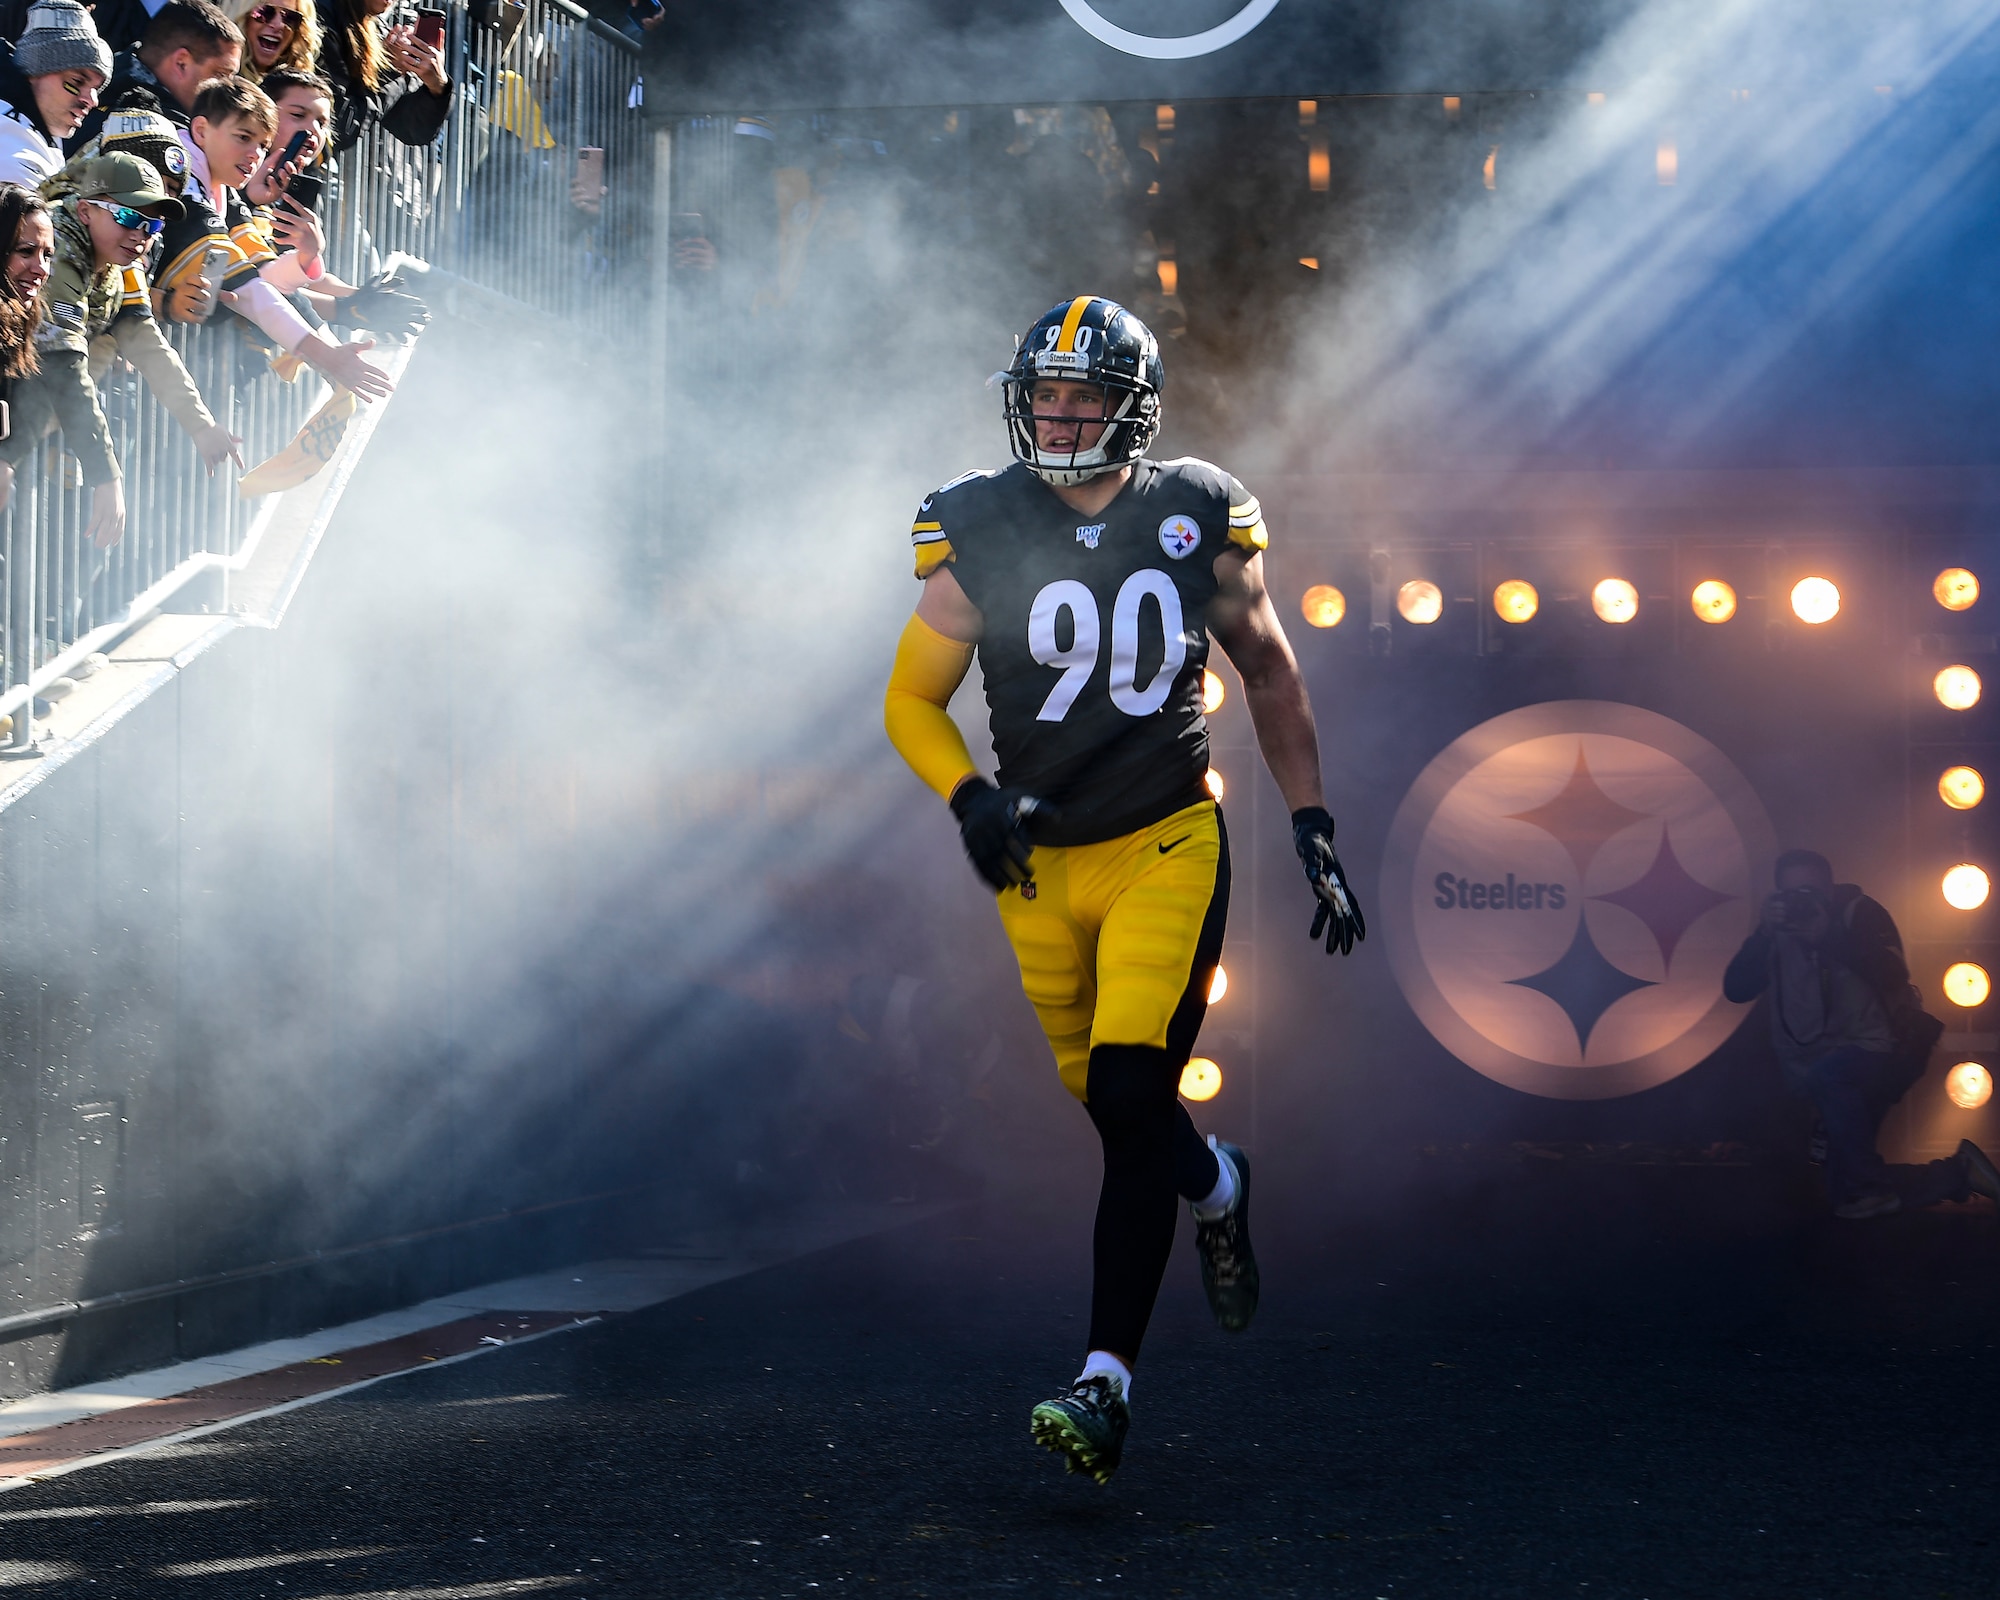 Pittsburgh Steelers linebacker T.J. Watt runs onto the field before a Pittsburgh Steelers vs. Indianapolis Colts game at Heinz Field in Pittsburgh, Pennsylvania, November 3, 2019.